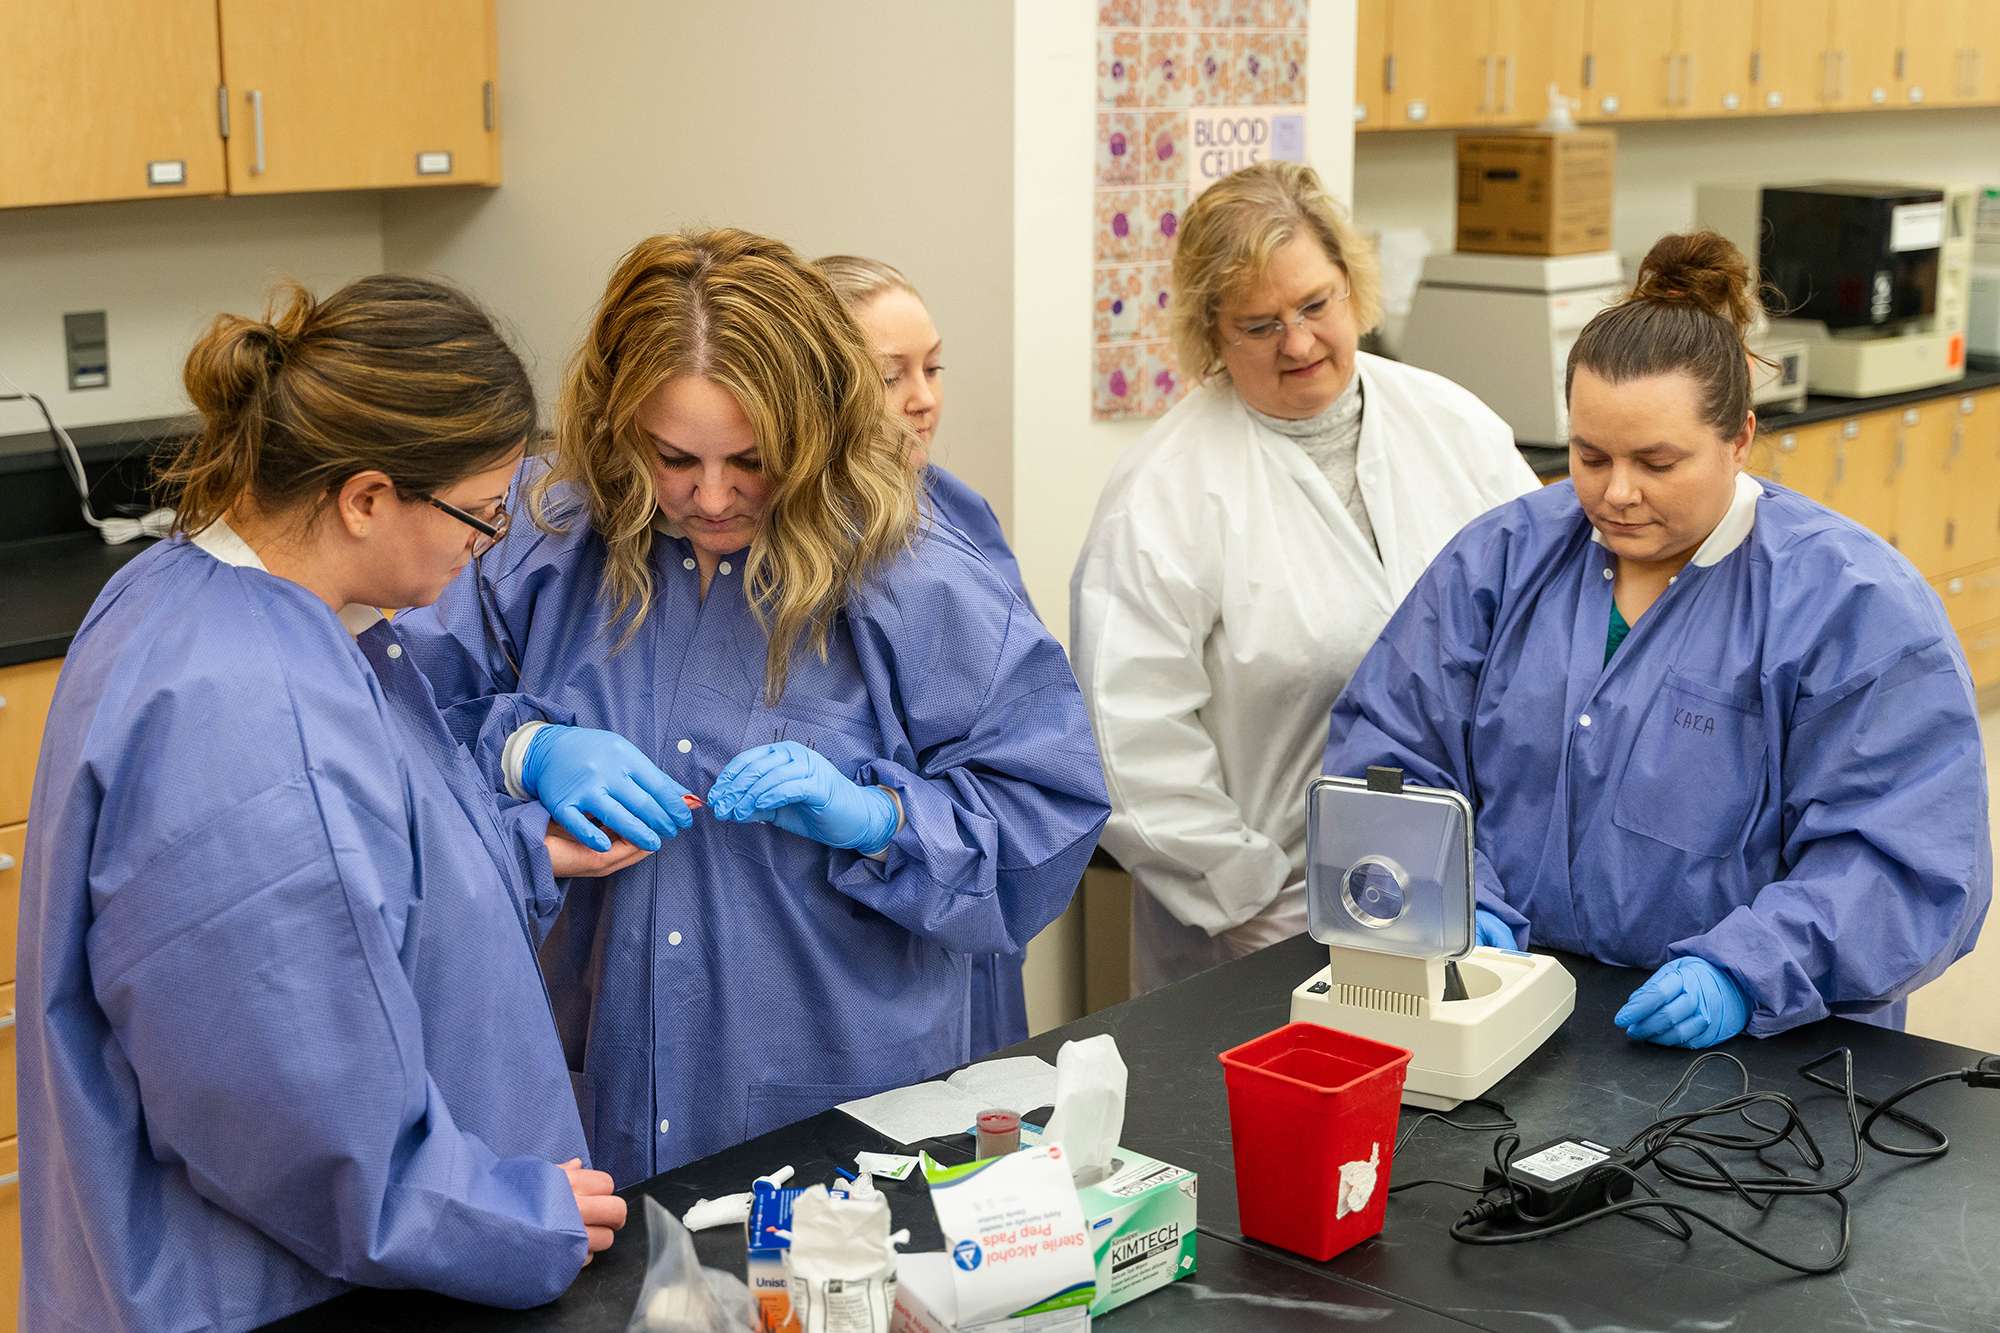 Four Medical Assistants and an instructor are working on blood samples together inside of a medical lab.